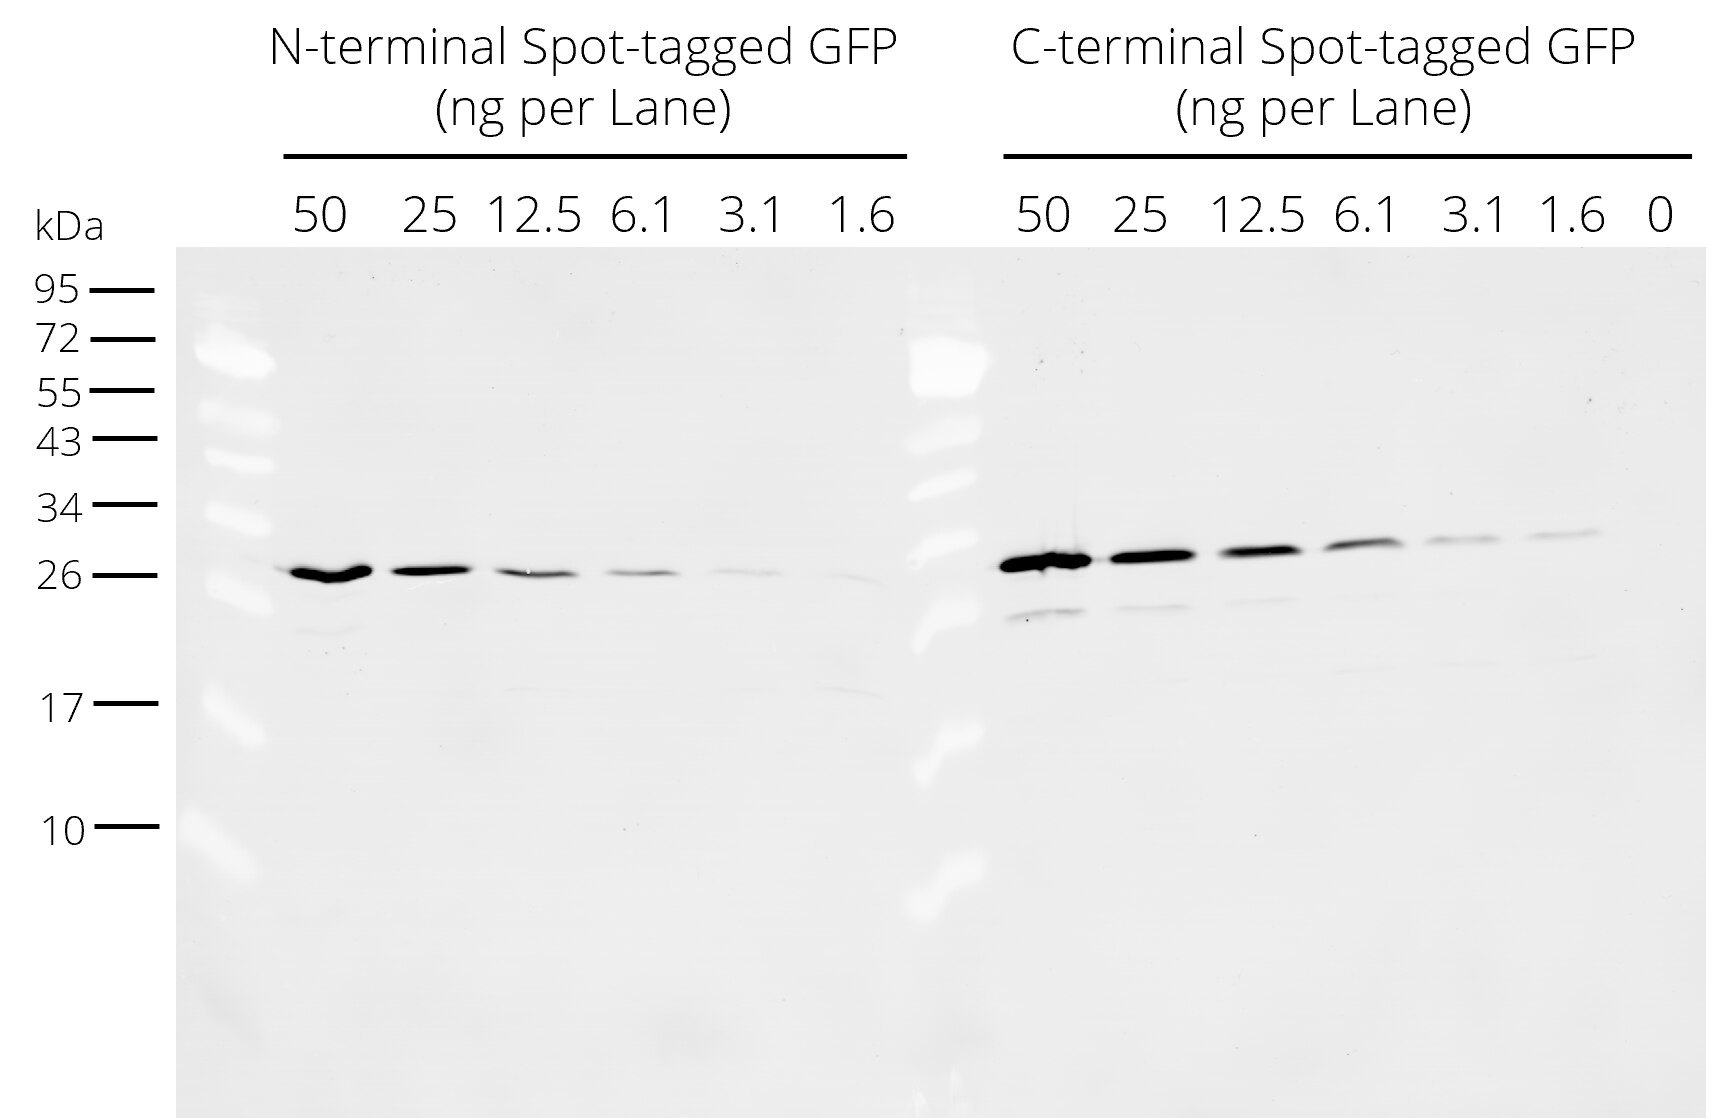 Western blot analysis of N- and C-terminal Spot-tagged GFP added to HEK- 293T cell lysate. Detection with Spot-tag® antibody [28A5] (28a5, ChromoTek) 1:5,000 and Nano-Secondary® alpaca anti-mouse IgG1, recombinant VHH, Alexa Fluor® 488 [CTK0103, CTK0104] (sms1AF488-1, ChromoTek) 1:5,000. Western blot membrane was incubated simultaneously with the primary antibody and Nano-Secondary® (one-step staining).